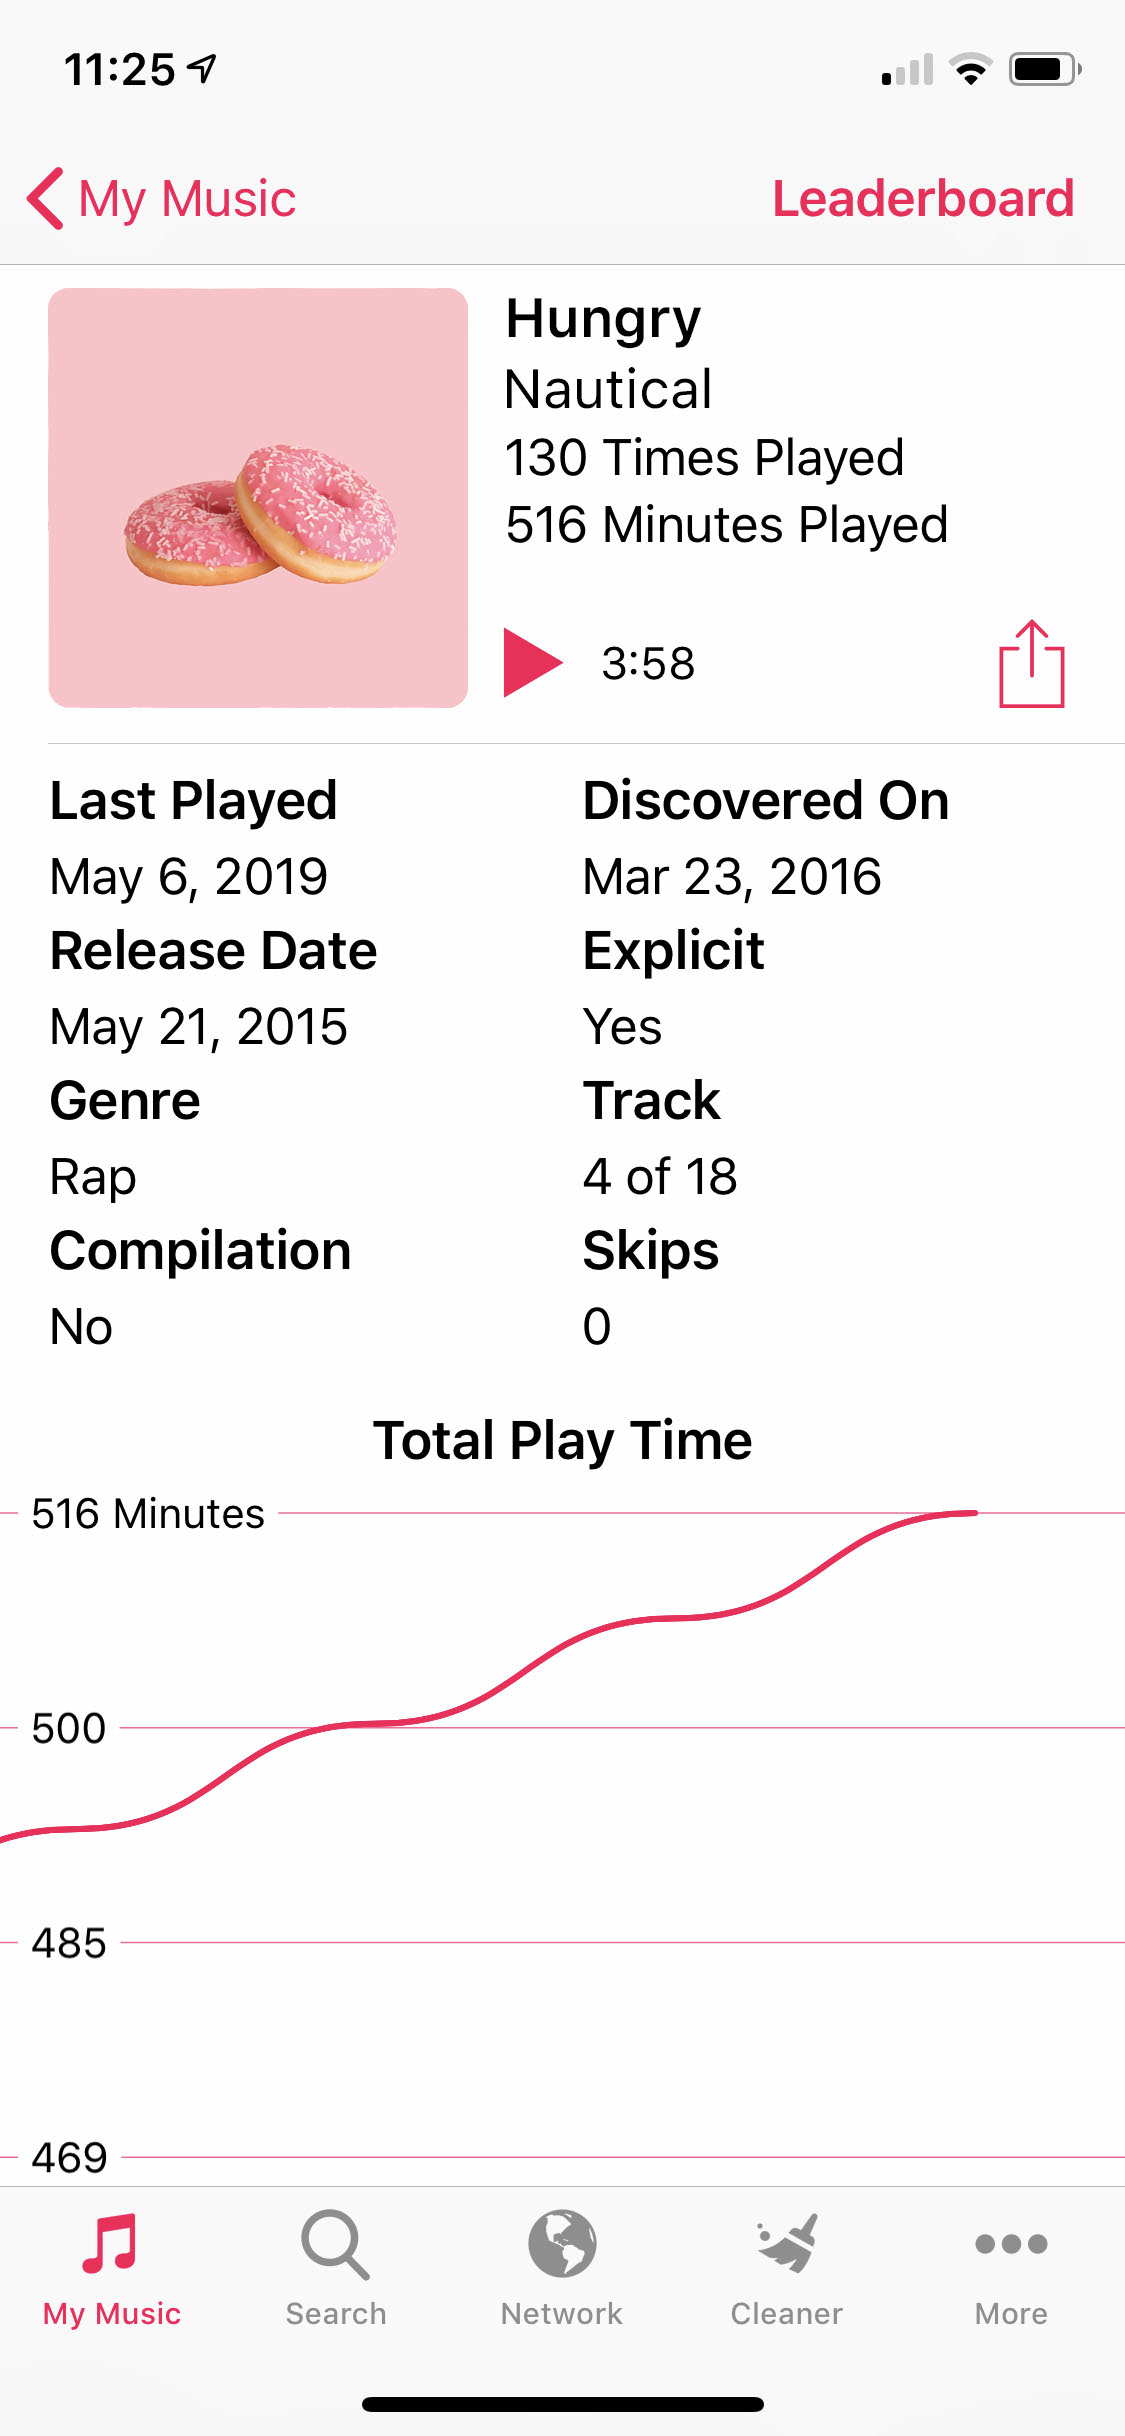 snd.wave is displaying statistics for a song in a users library. This includes play time, play count, skip count, discovery date, and more! This page also shows graphs including play time over time.